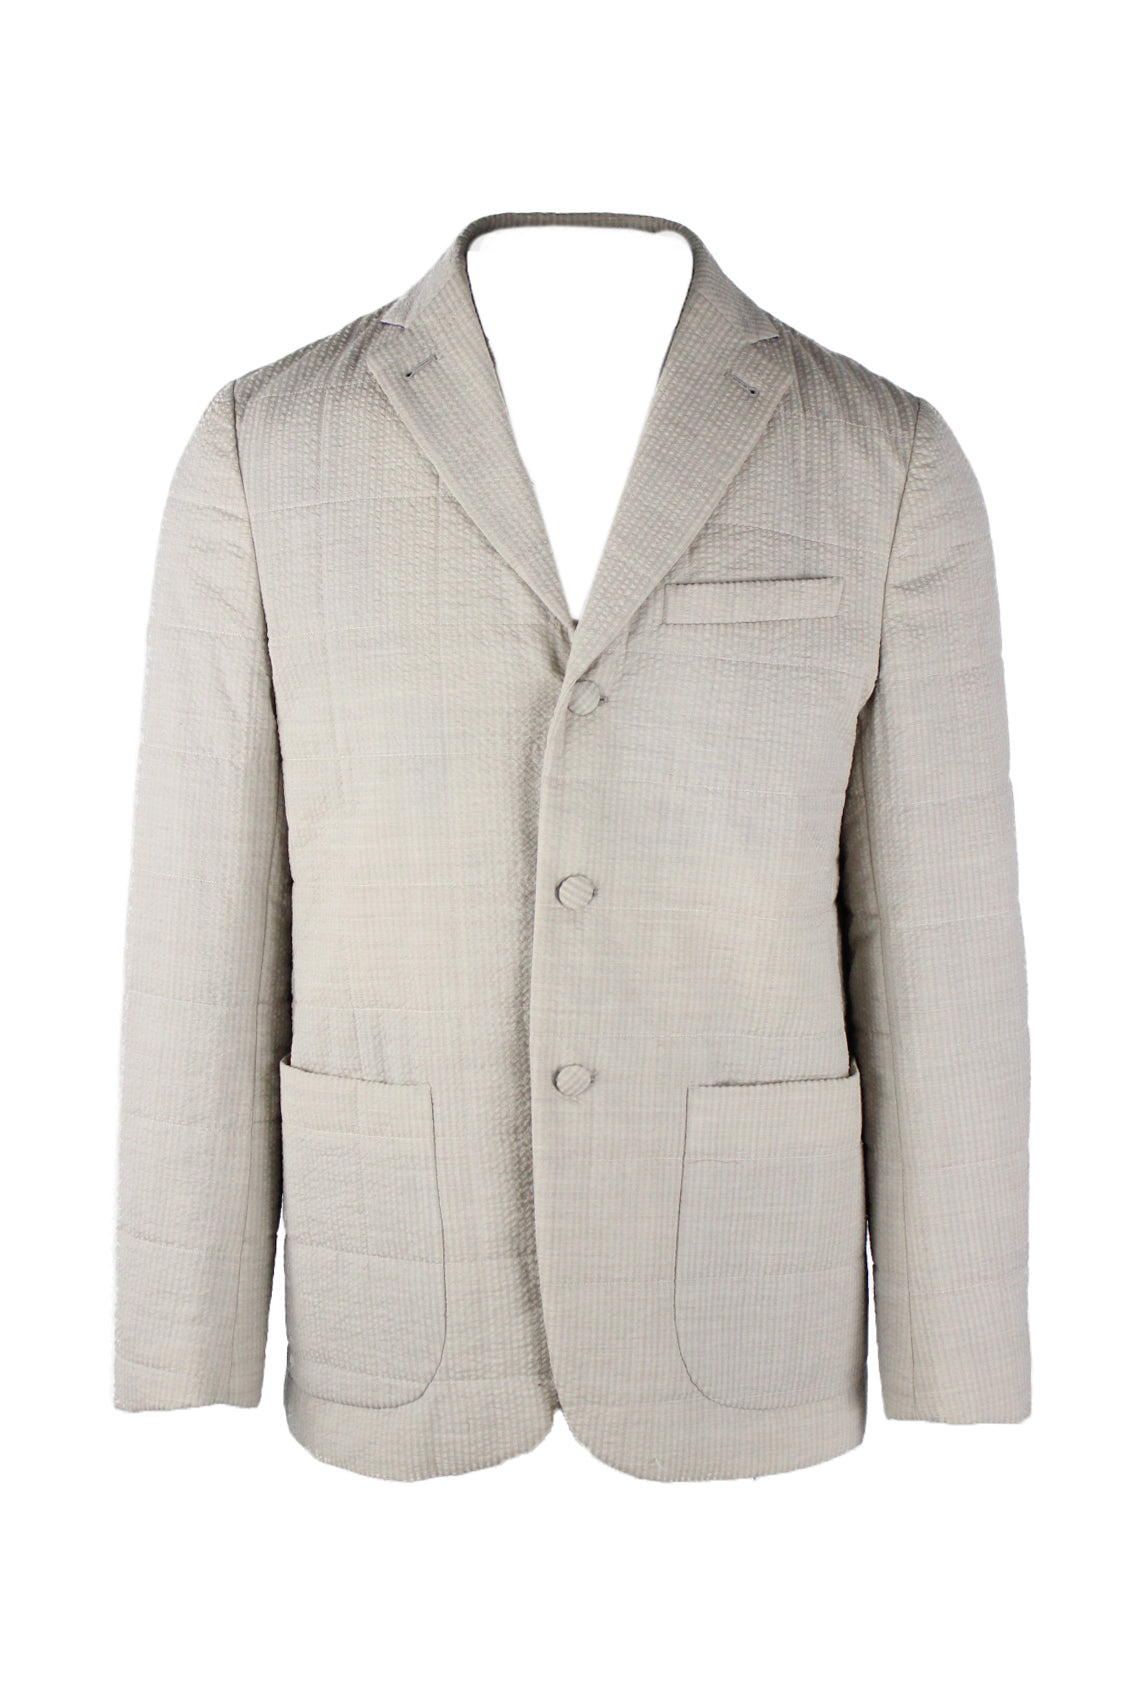 front view of stephen f beige ‘simon 77’ quilted textured wool blend button up blazer. features front hand pockets, left breast pocket, multi inner slot pockets, and buttons at cuffs.